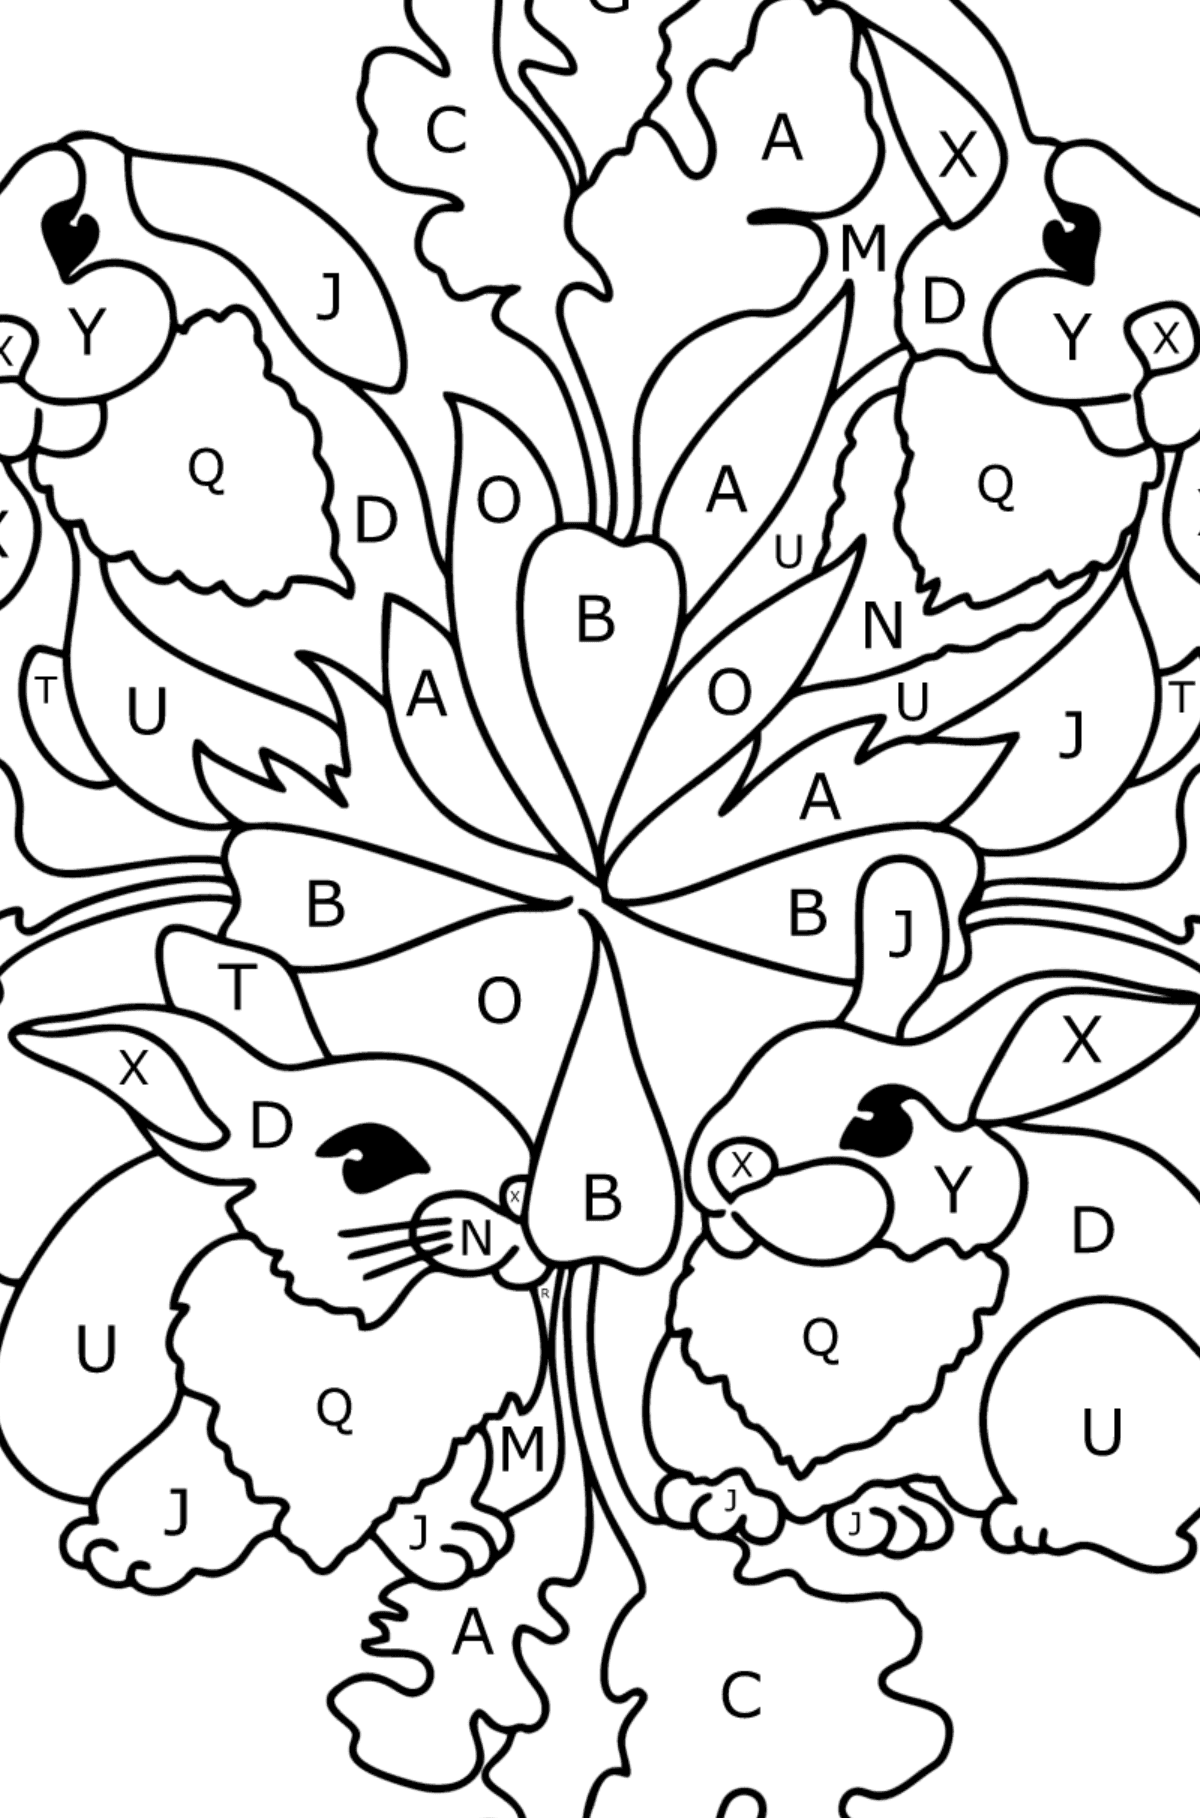 Mandala Bunny coloring page - Coloring by Letters for Kids